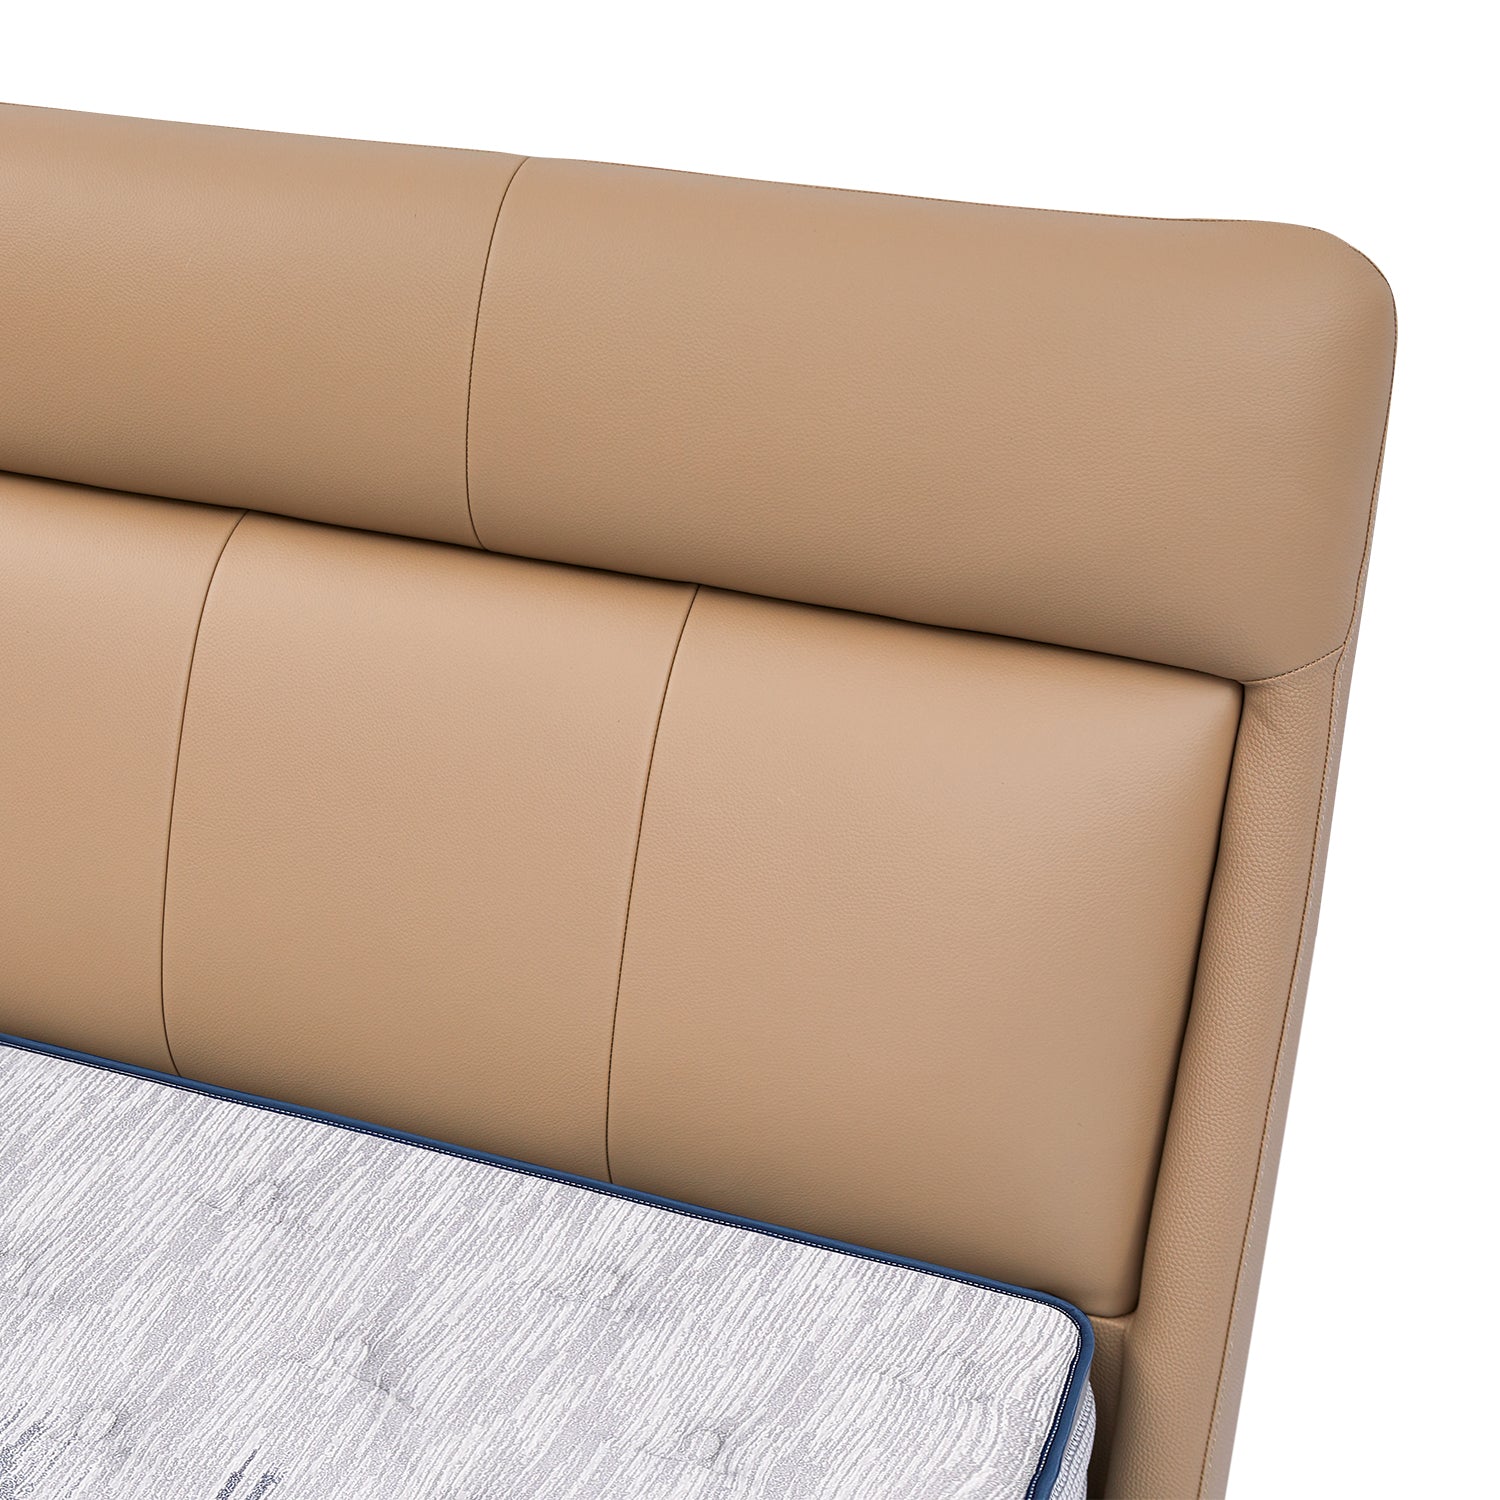 Tan leather bed frame headboard close-up showcasing detailed stitching from DeRUCCI with adjoining mattress.